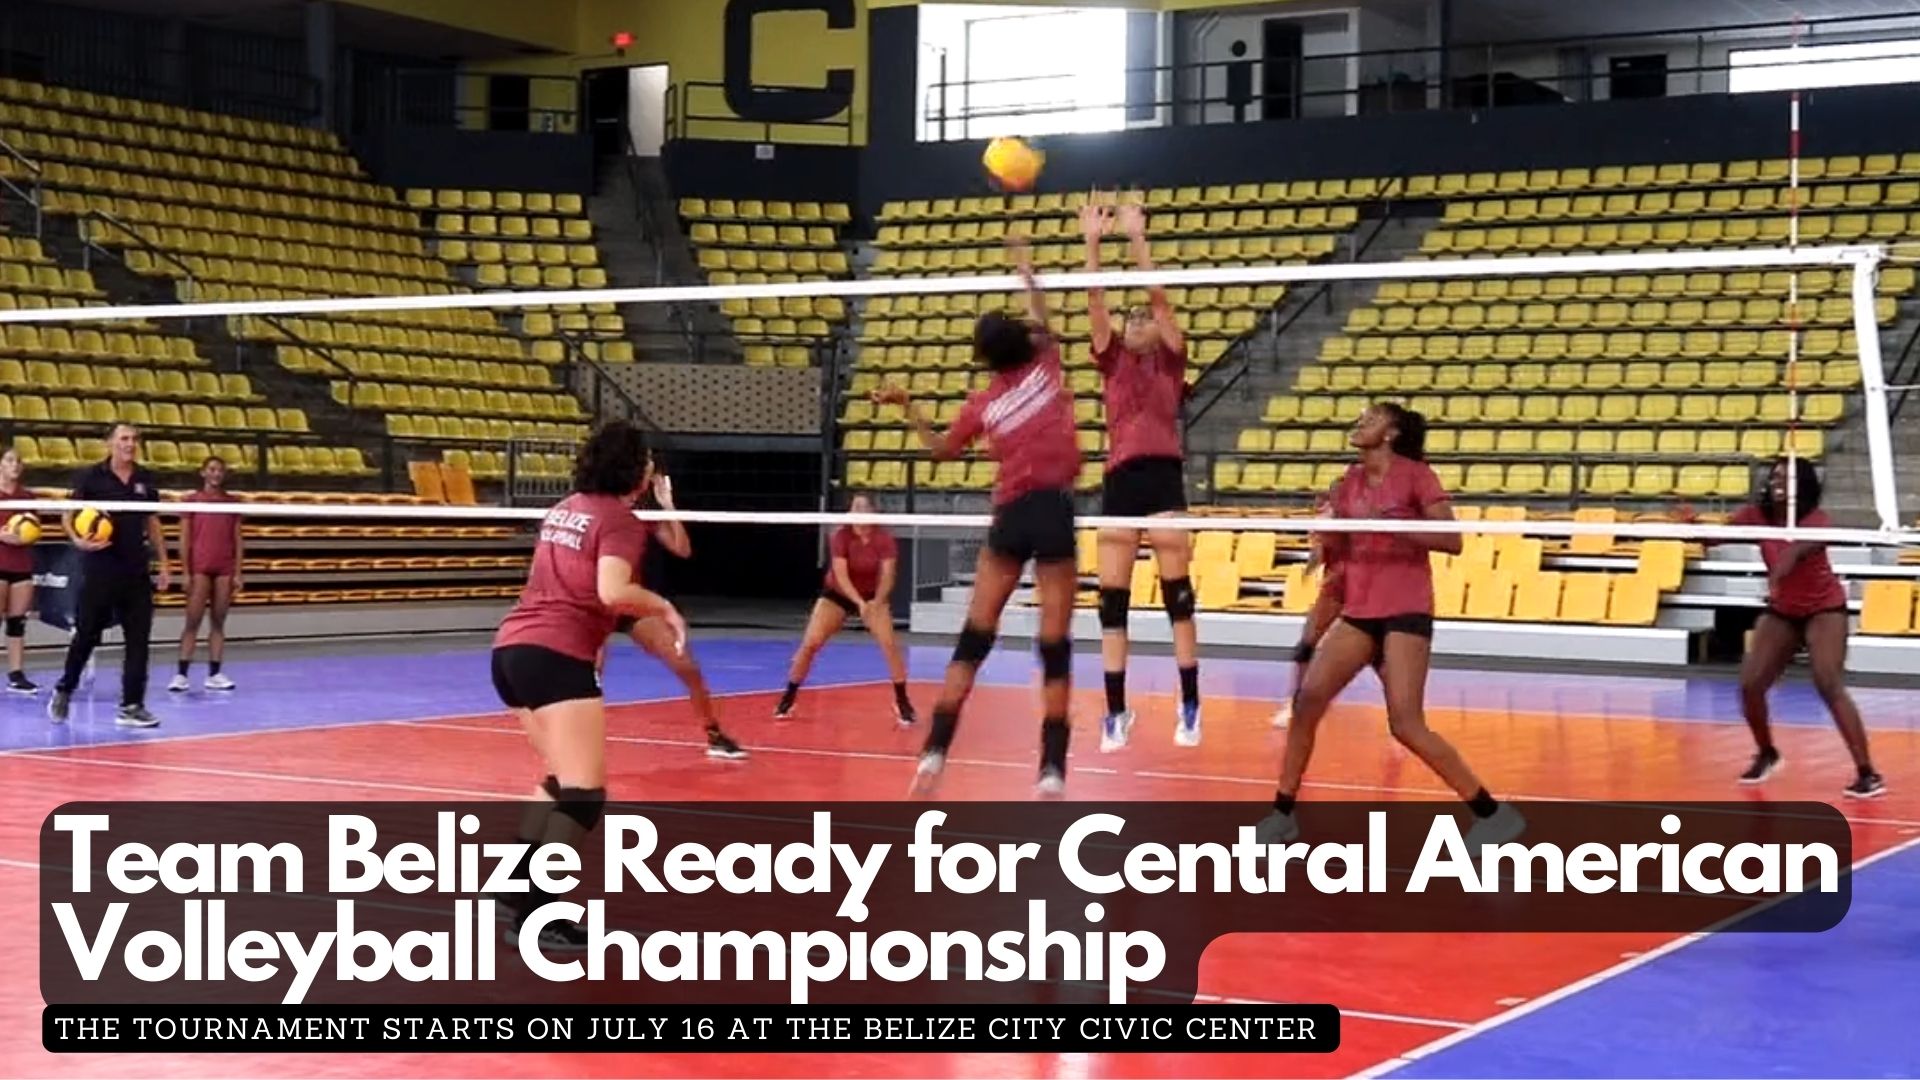 Team Belize Ready for Central American Volleyball Championship